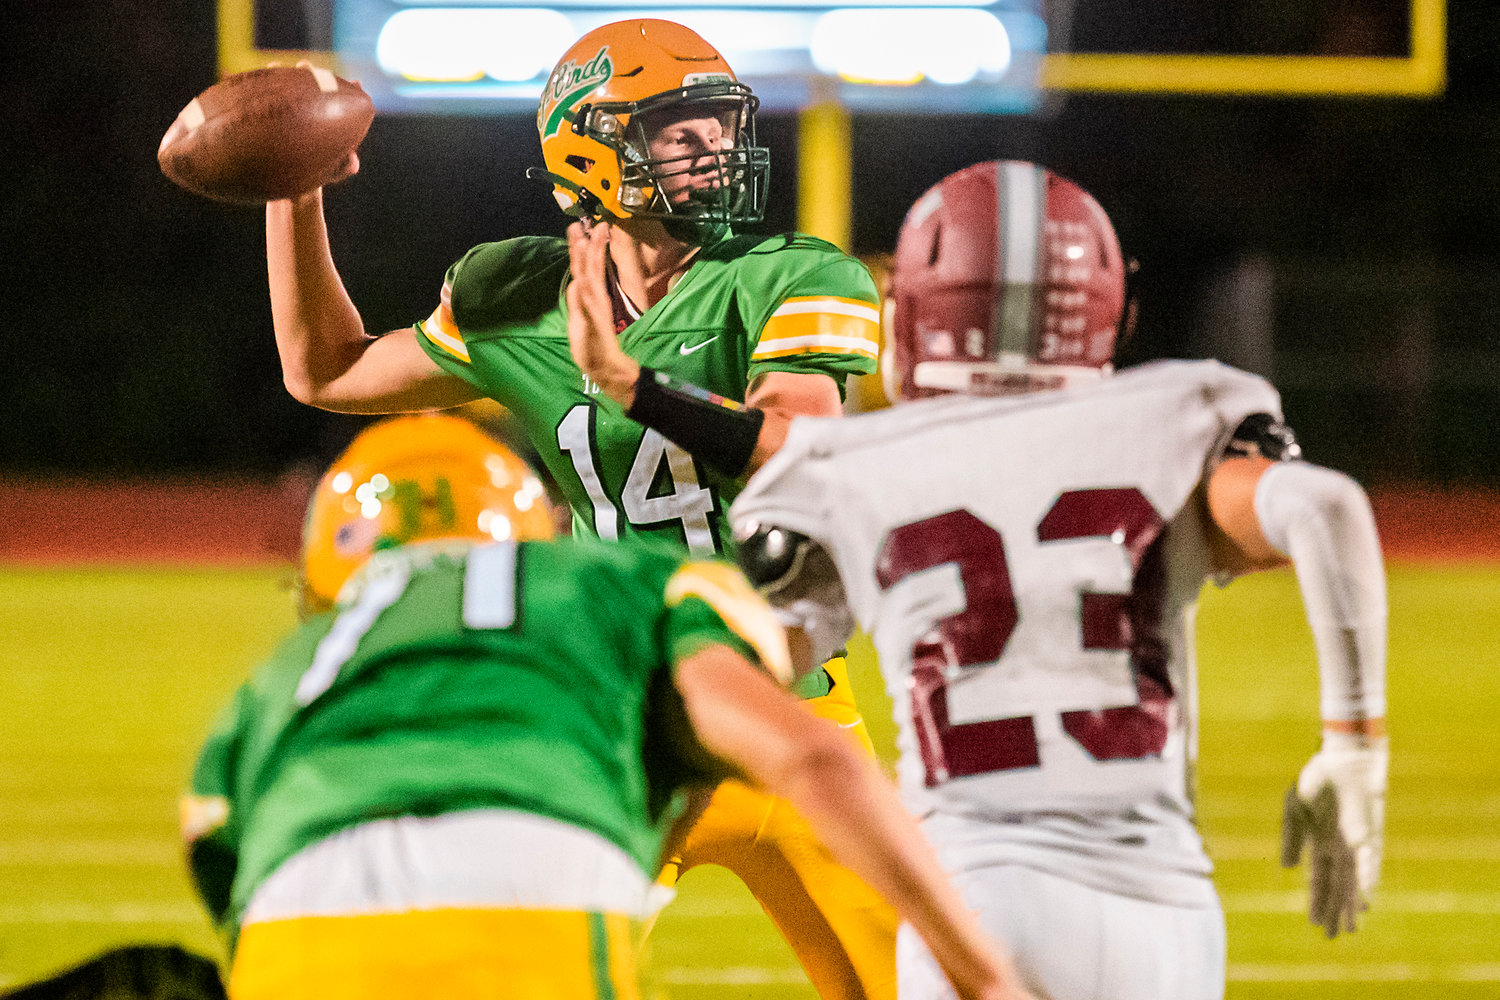 Tumwater’s quarterback Alex Overbay looks to pass as defenders close in Friday night during a game against W.F. West.